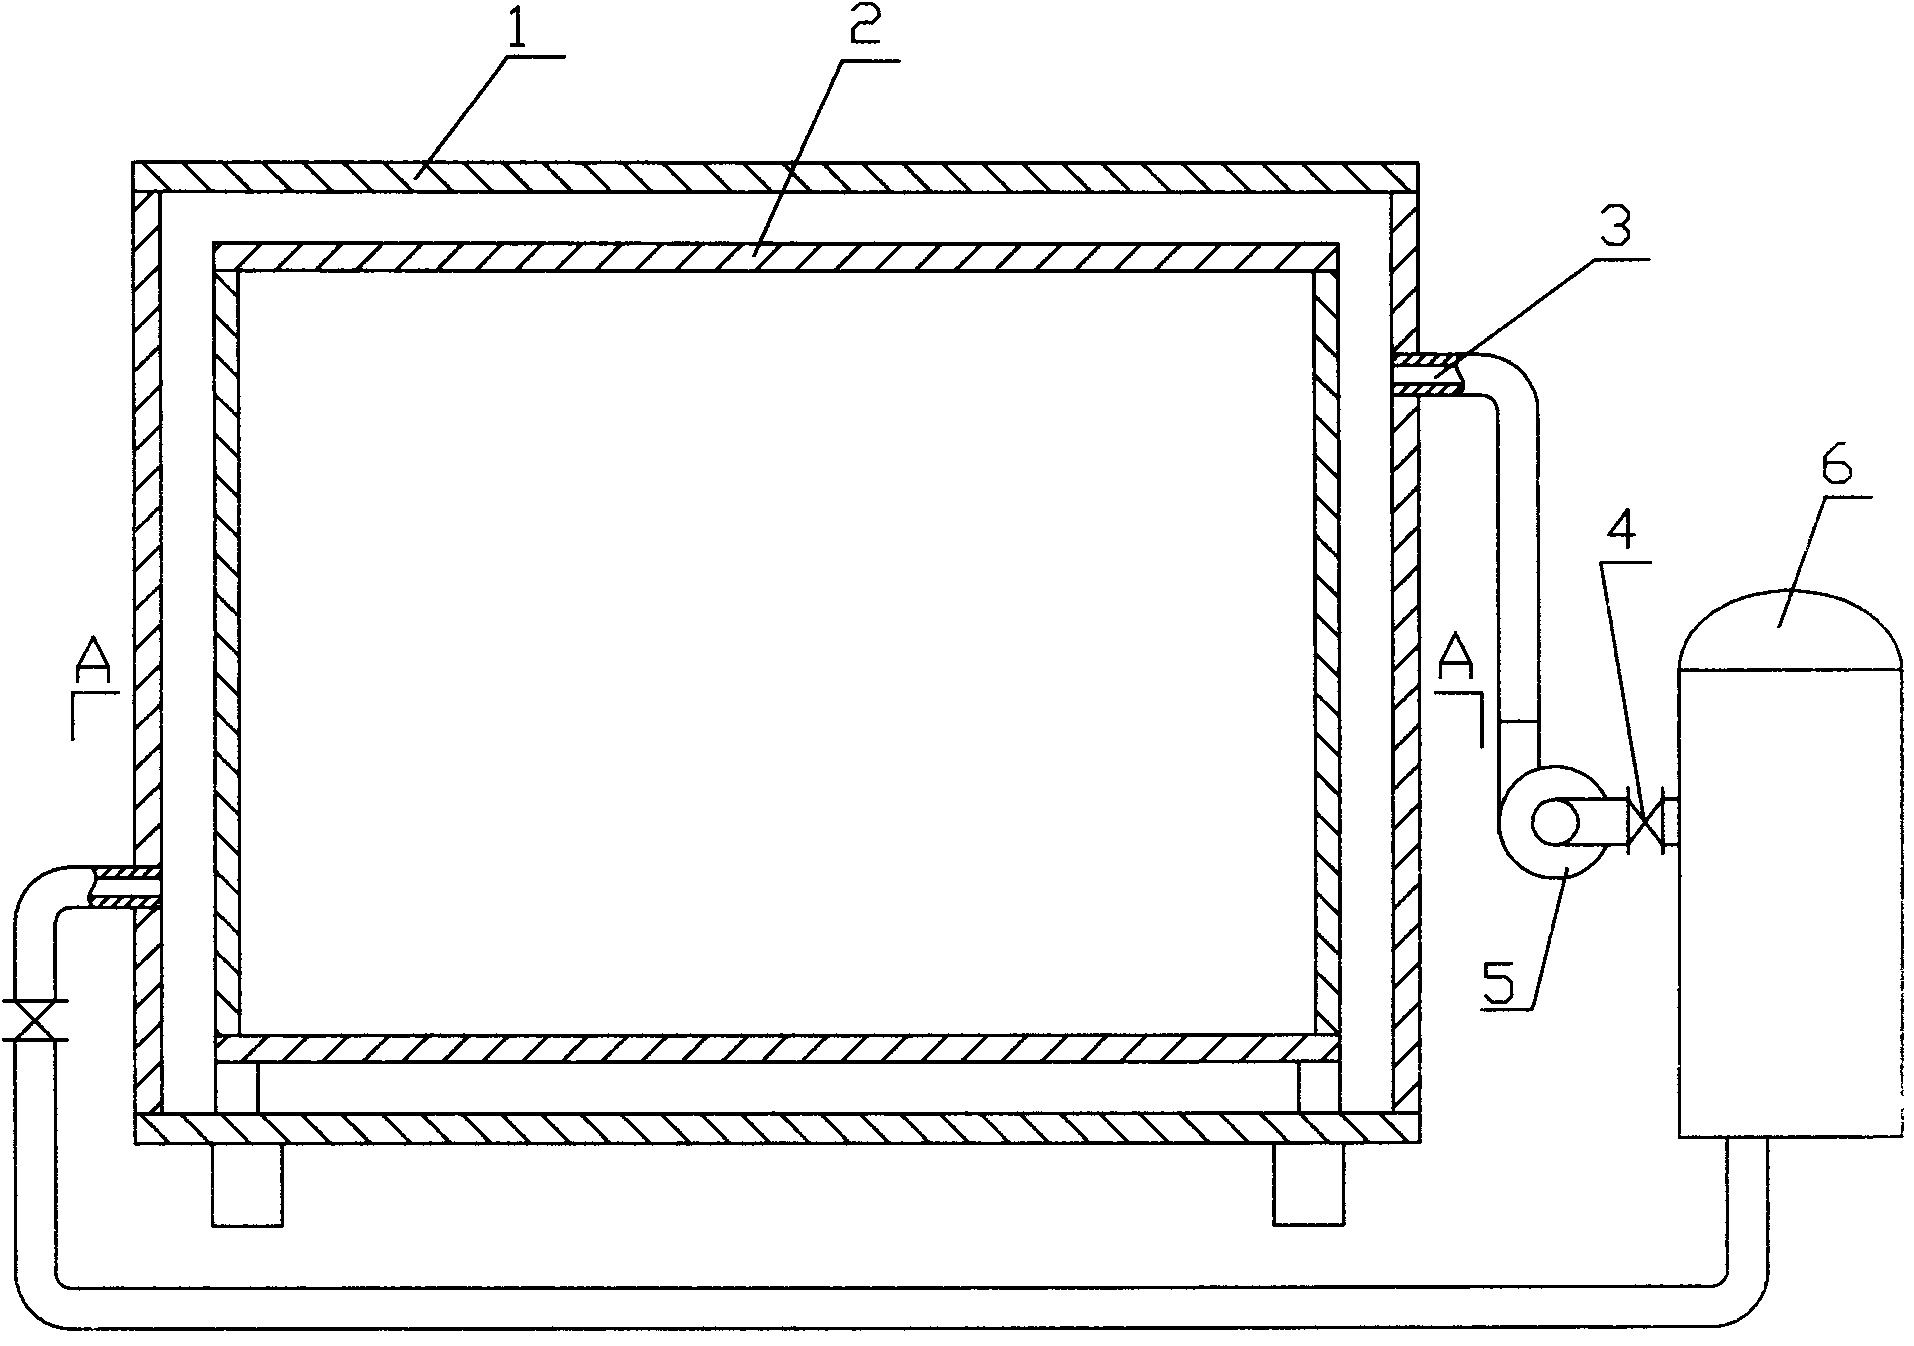 Dry fermentation device for processing tea